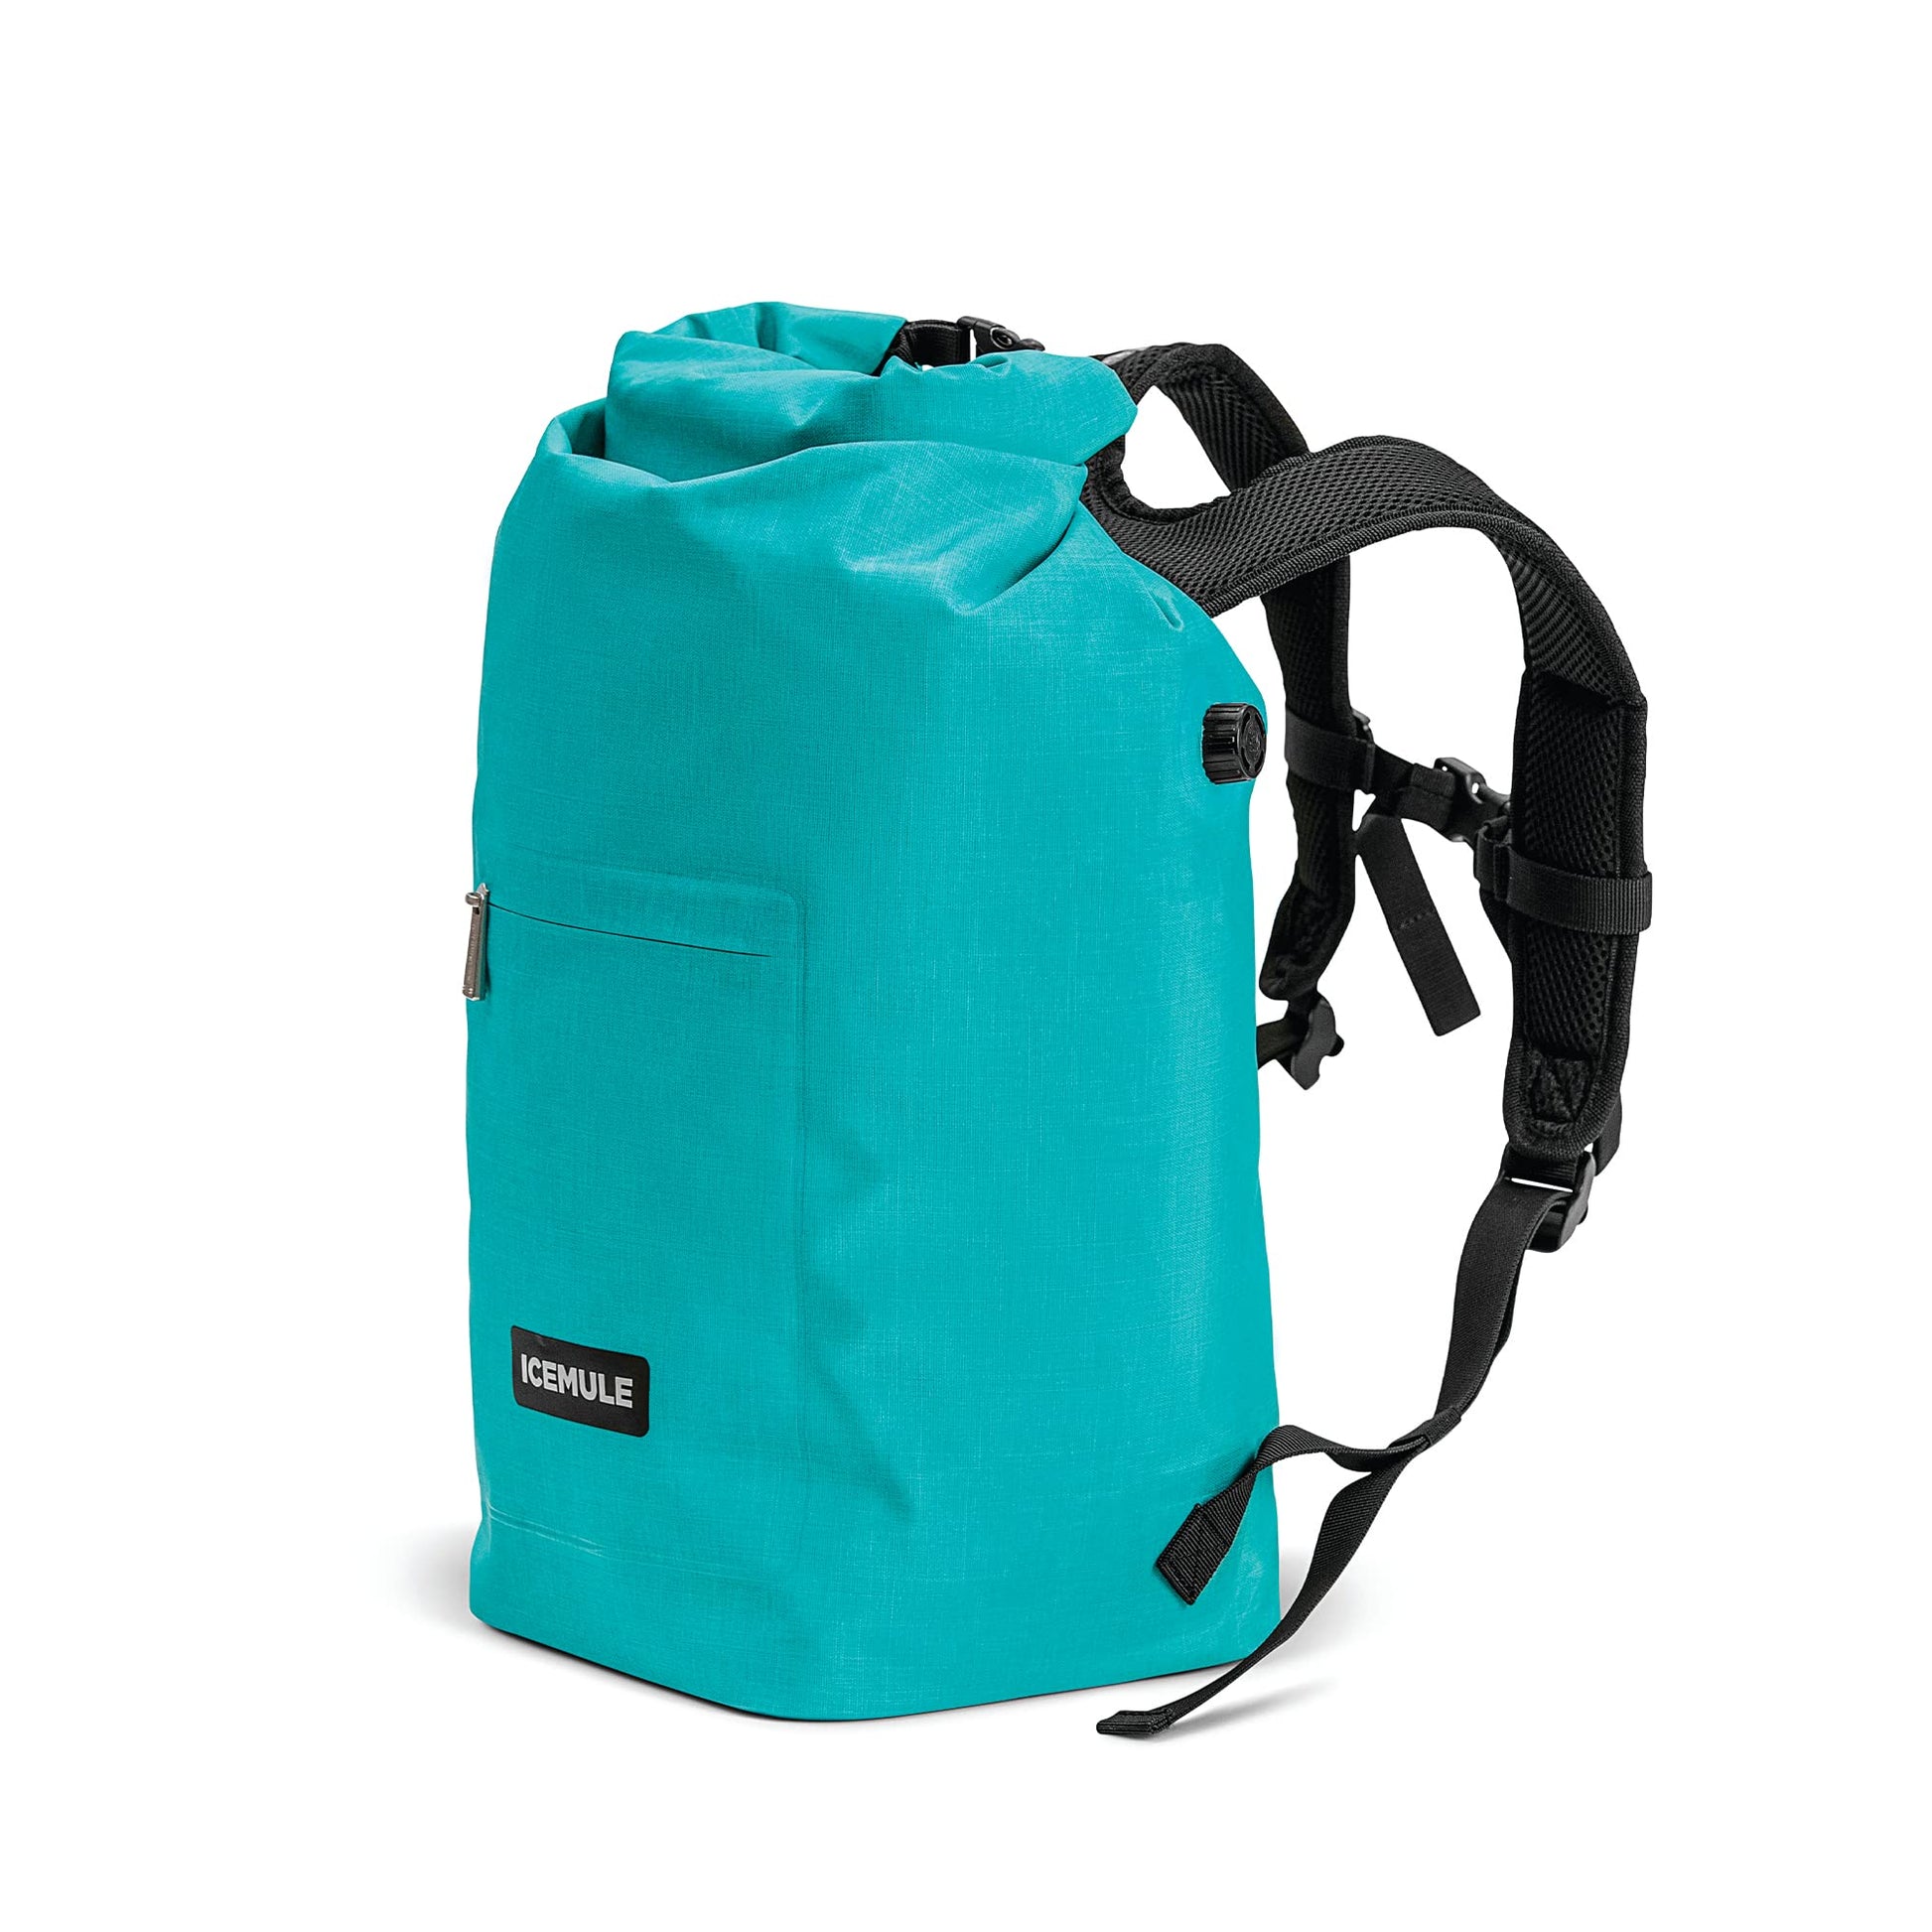 ICEMULE Jaunt Collapsible Backpack Cooler - Hands Free, 100% Waterproof, 24+ Hours Cooling, Soft Sided Cooler